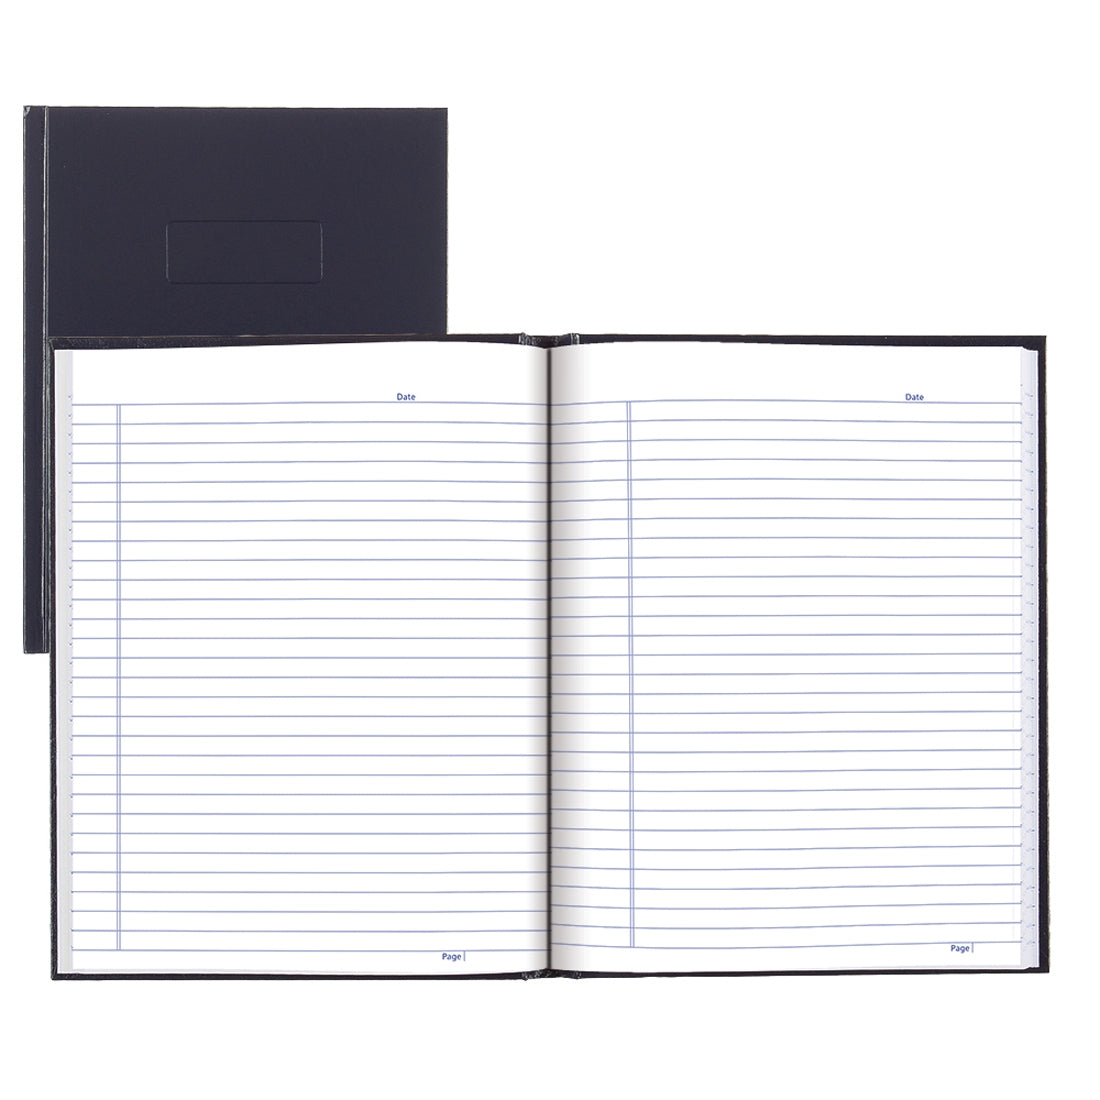 Page holder adhesive inserts - add extra pages to your diary